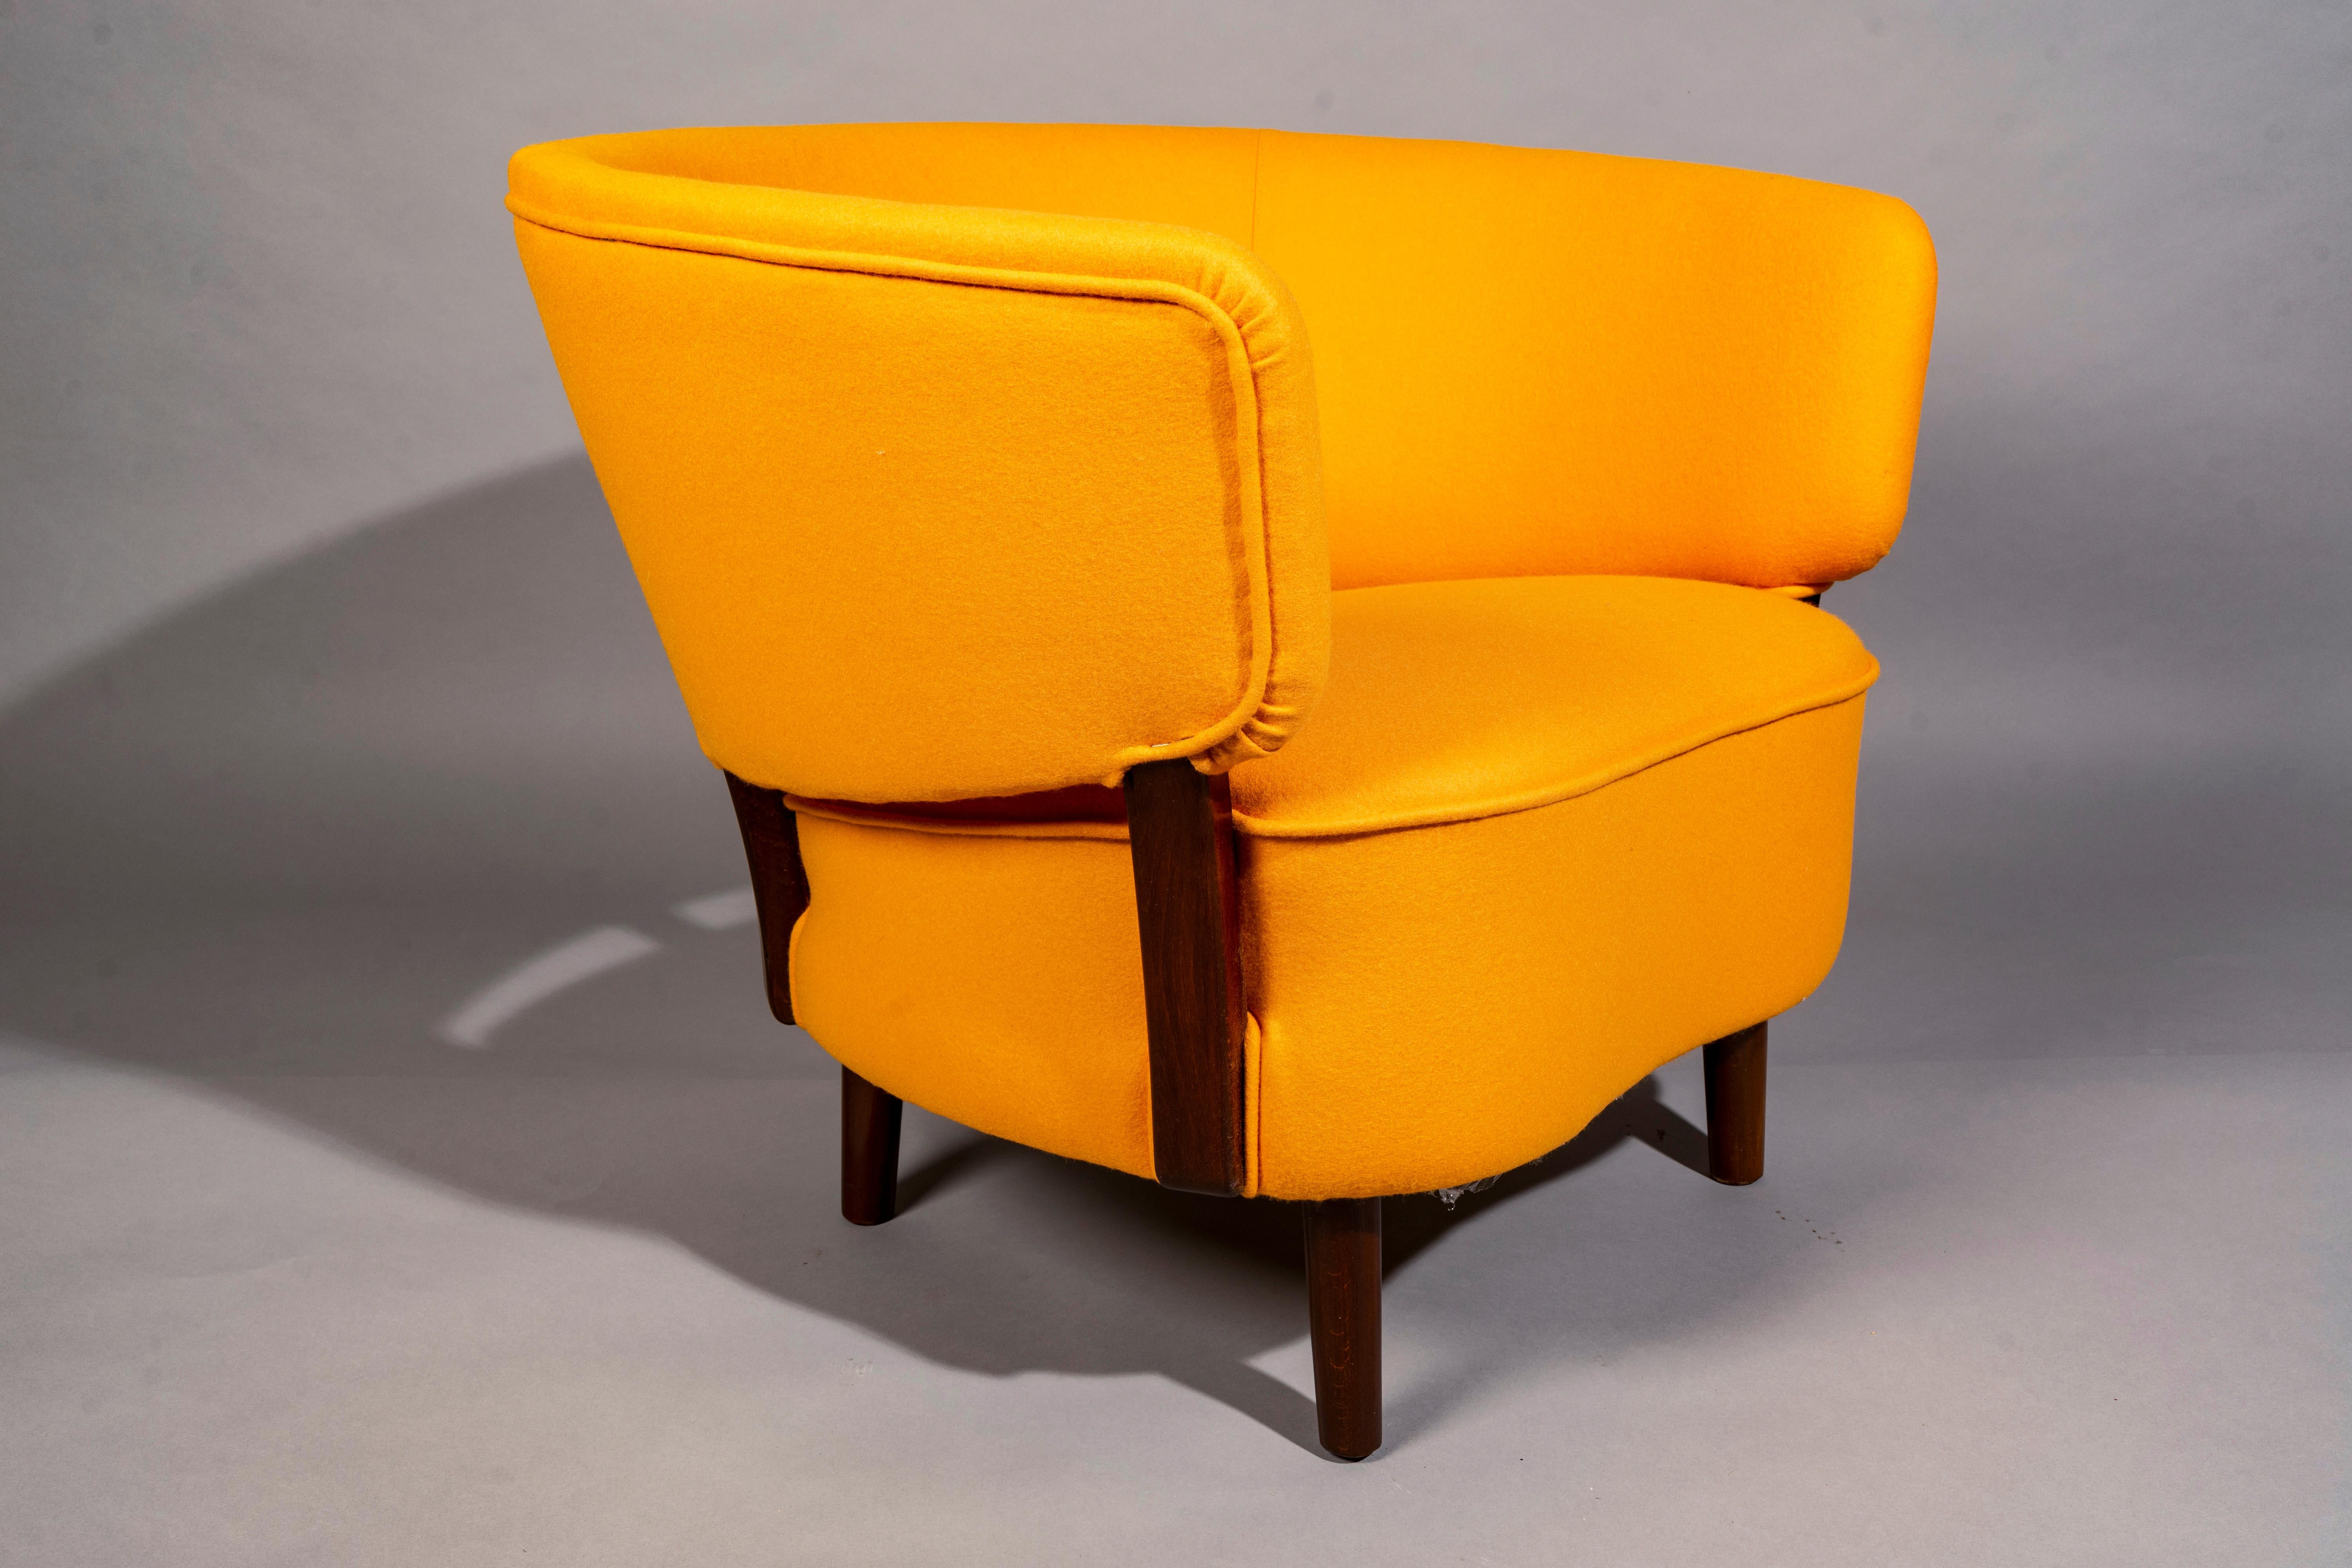 Armchair with floating back by Aage Sattrup for Maker Sattrups Polstermøbelfabrik, Denmark 1950s, stained beech, upholstered in Dominique Kieffer wool.